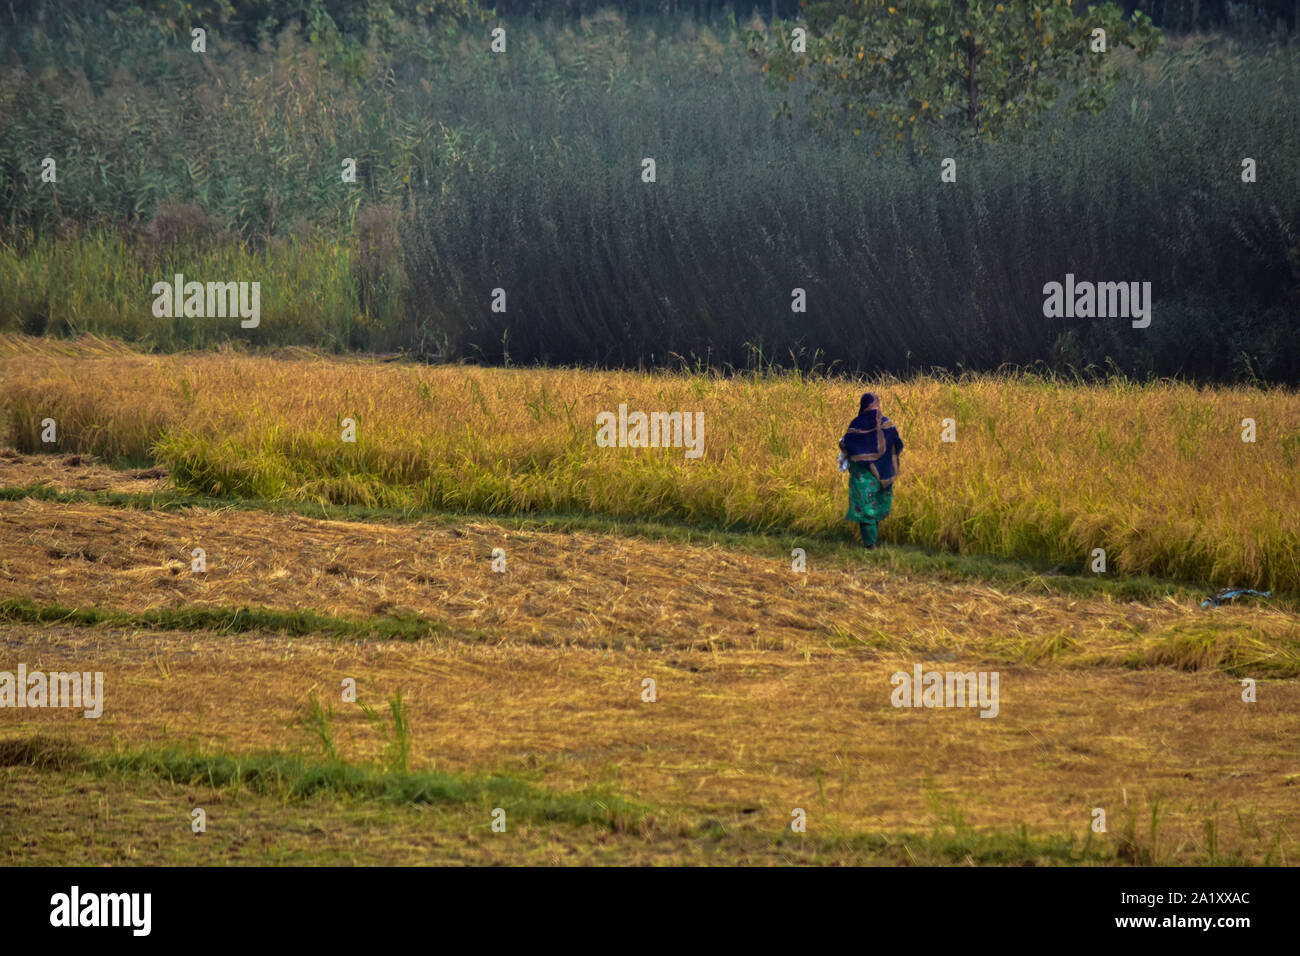 A Kashmiri farmer walks at the field during the rice harvest season on the outskirts of Srinagar, Kashmir.India is one of the world's largest producers of white rice and brown rice, accounting for 25% of all world rice production. Rice is India's pre-eminent crop and is the staple food of the people of the eastern and southern parts of the country. Stock Photo